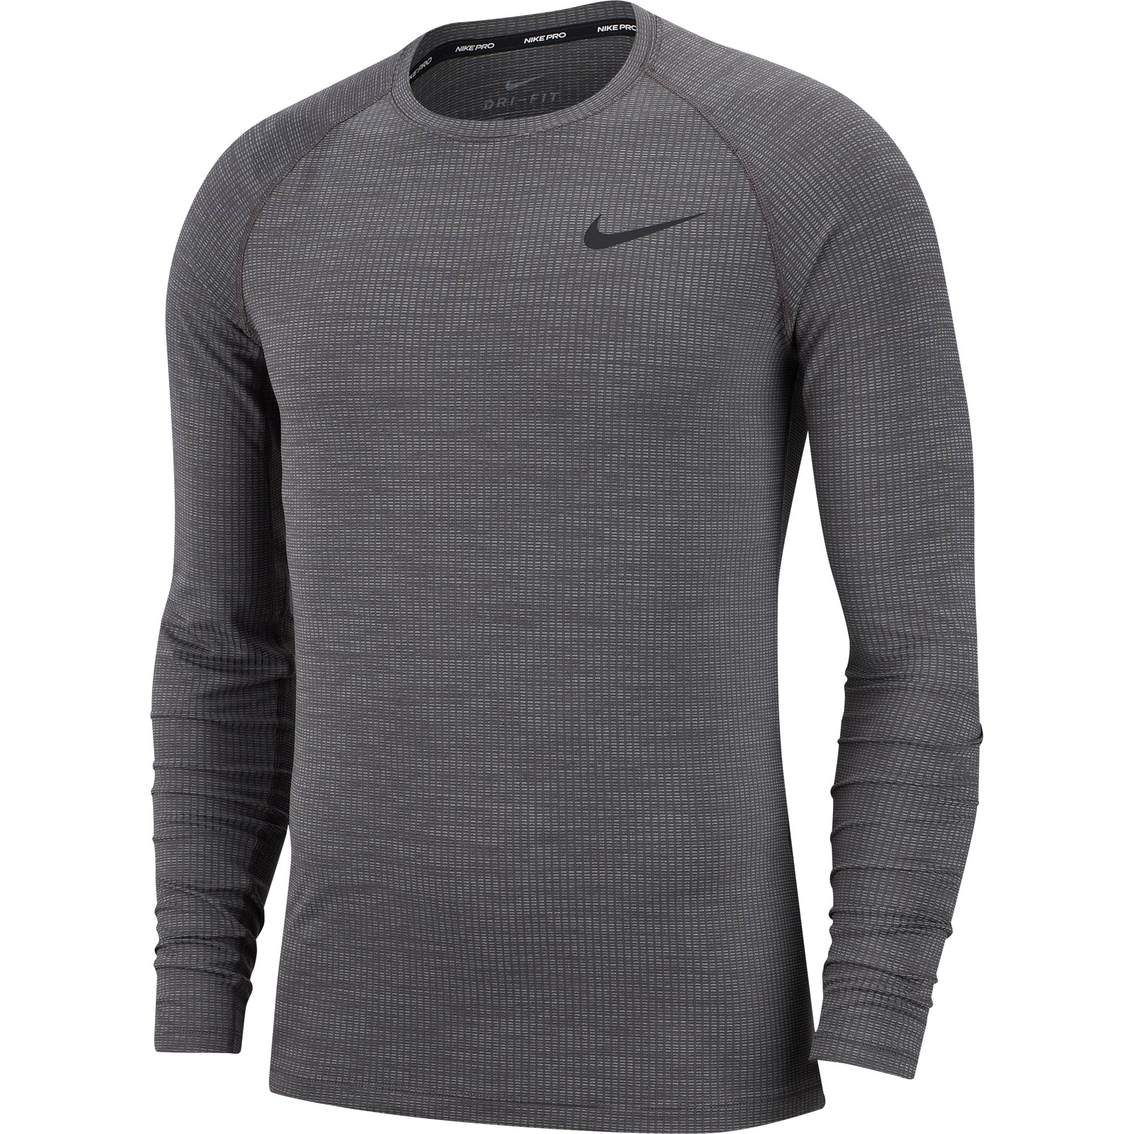 Nike Pro Slim Novelty Top | Shirts | Clothing & Accessories | Shop The ...